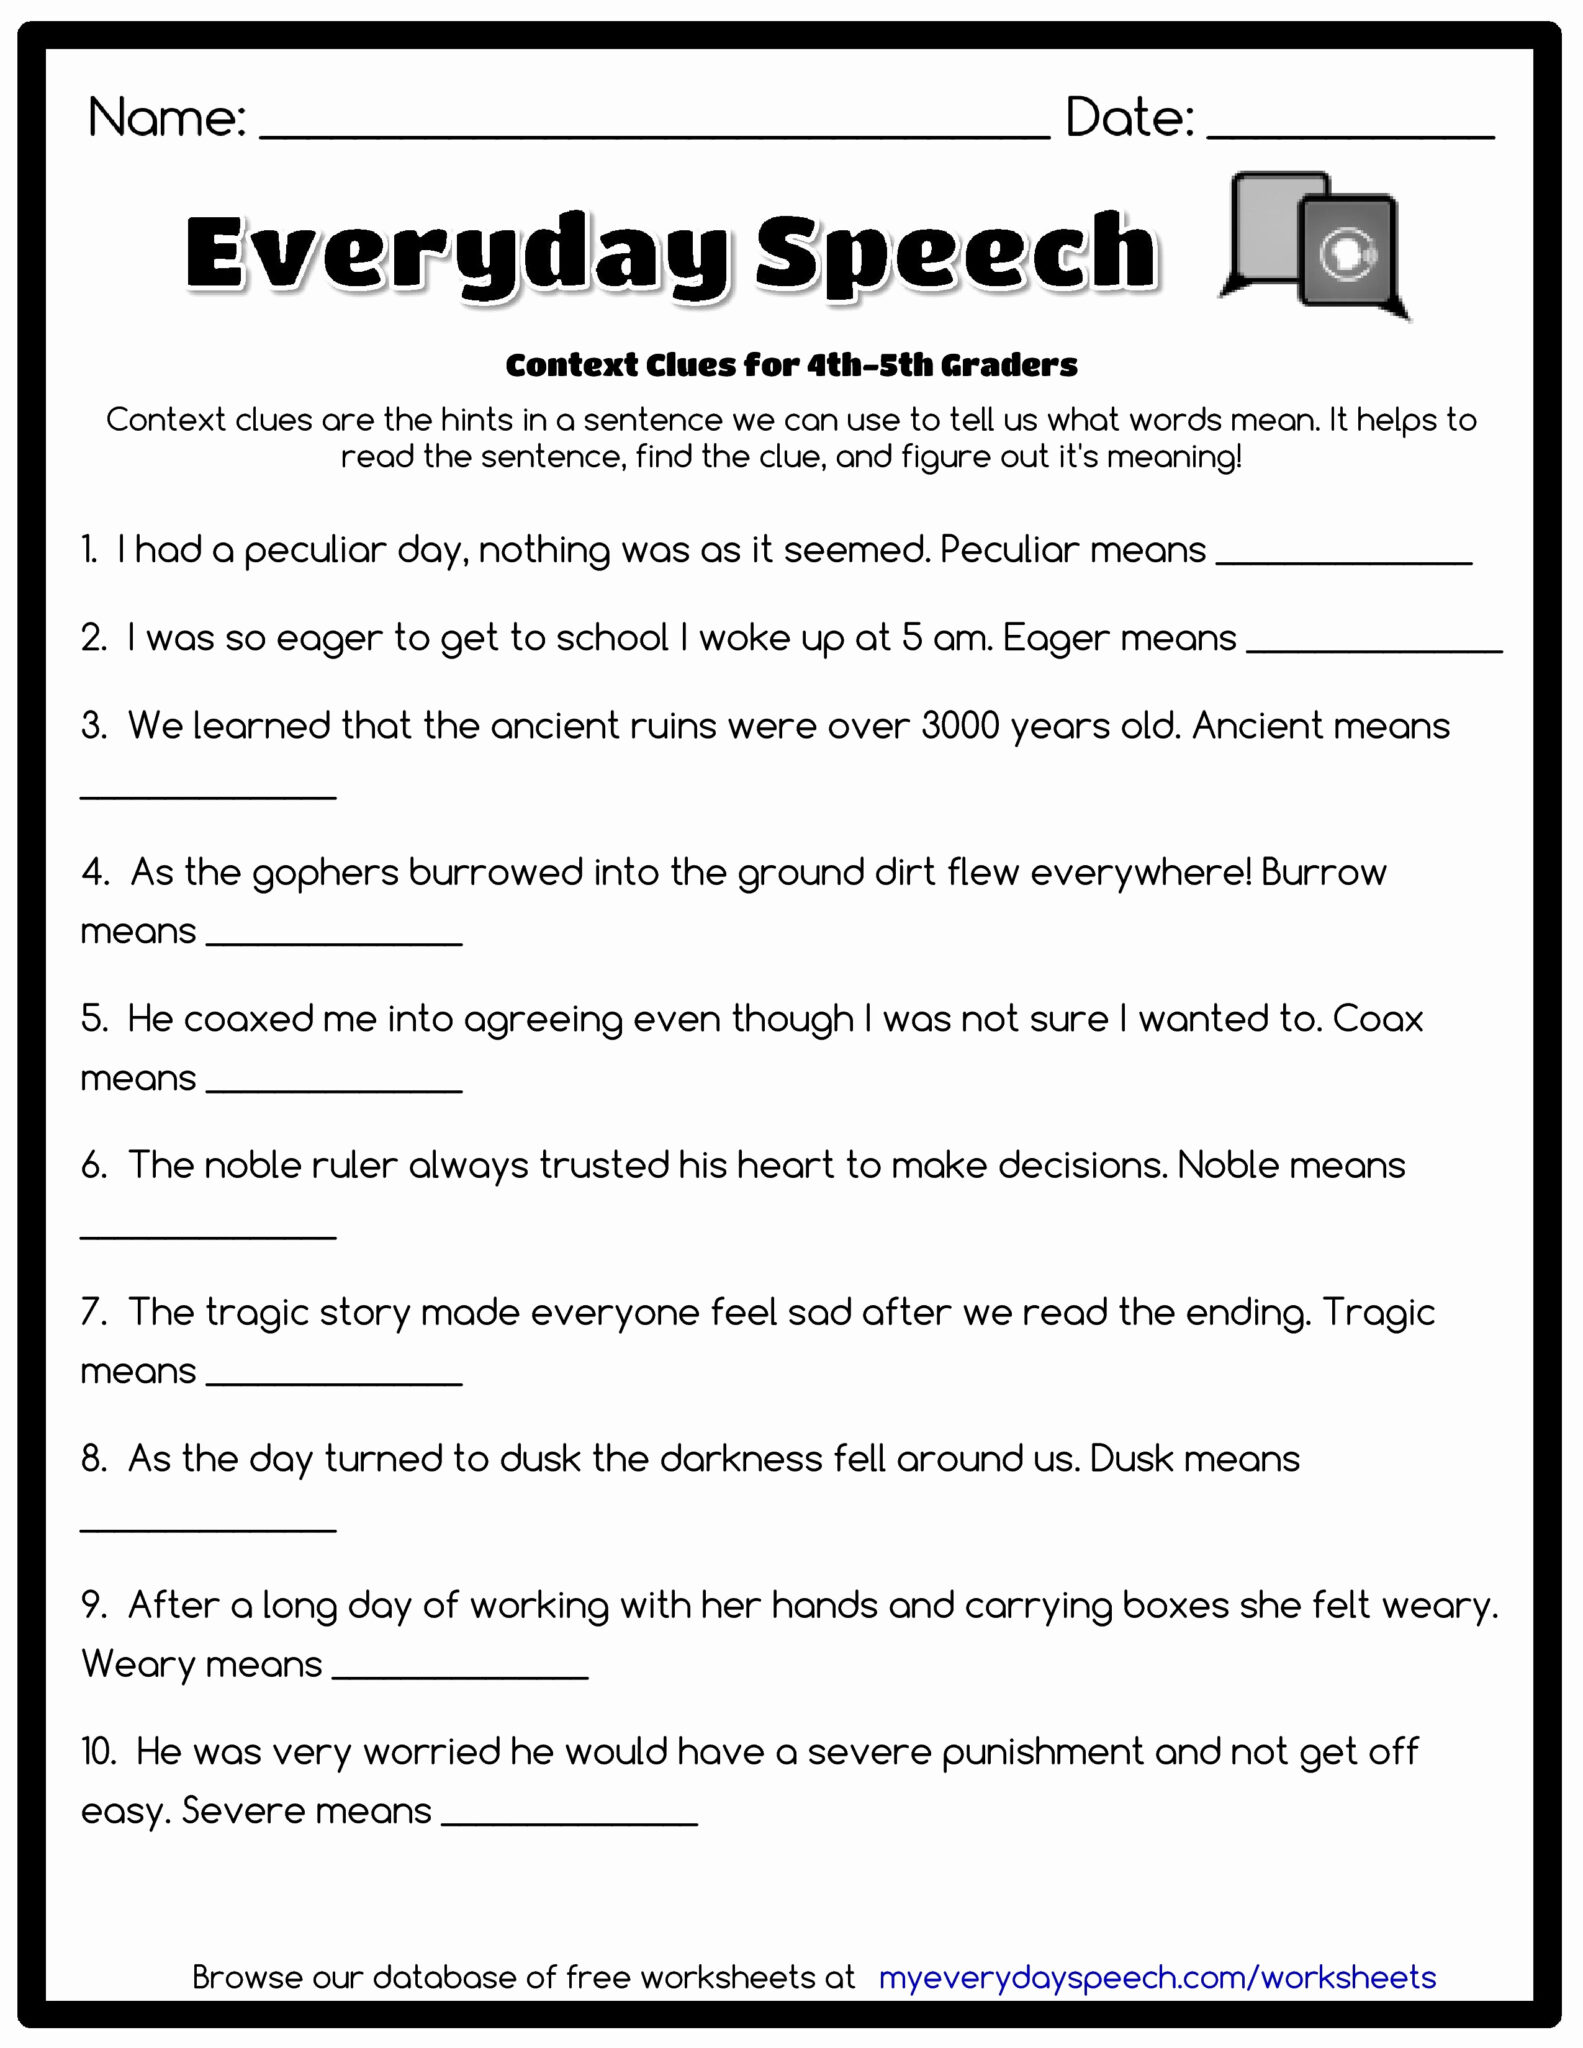 Worksheets For 3rd Graders Free Printable